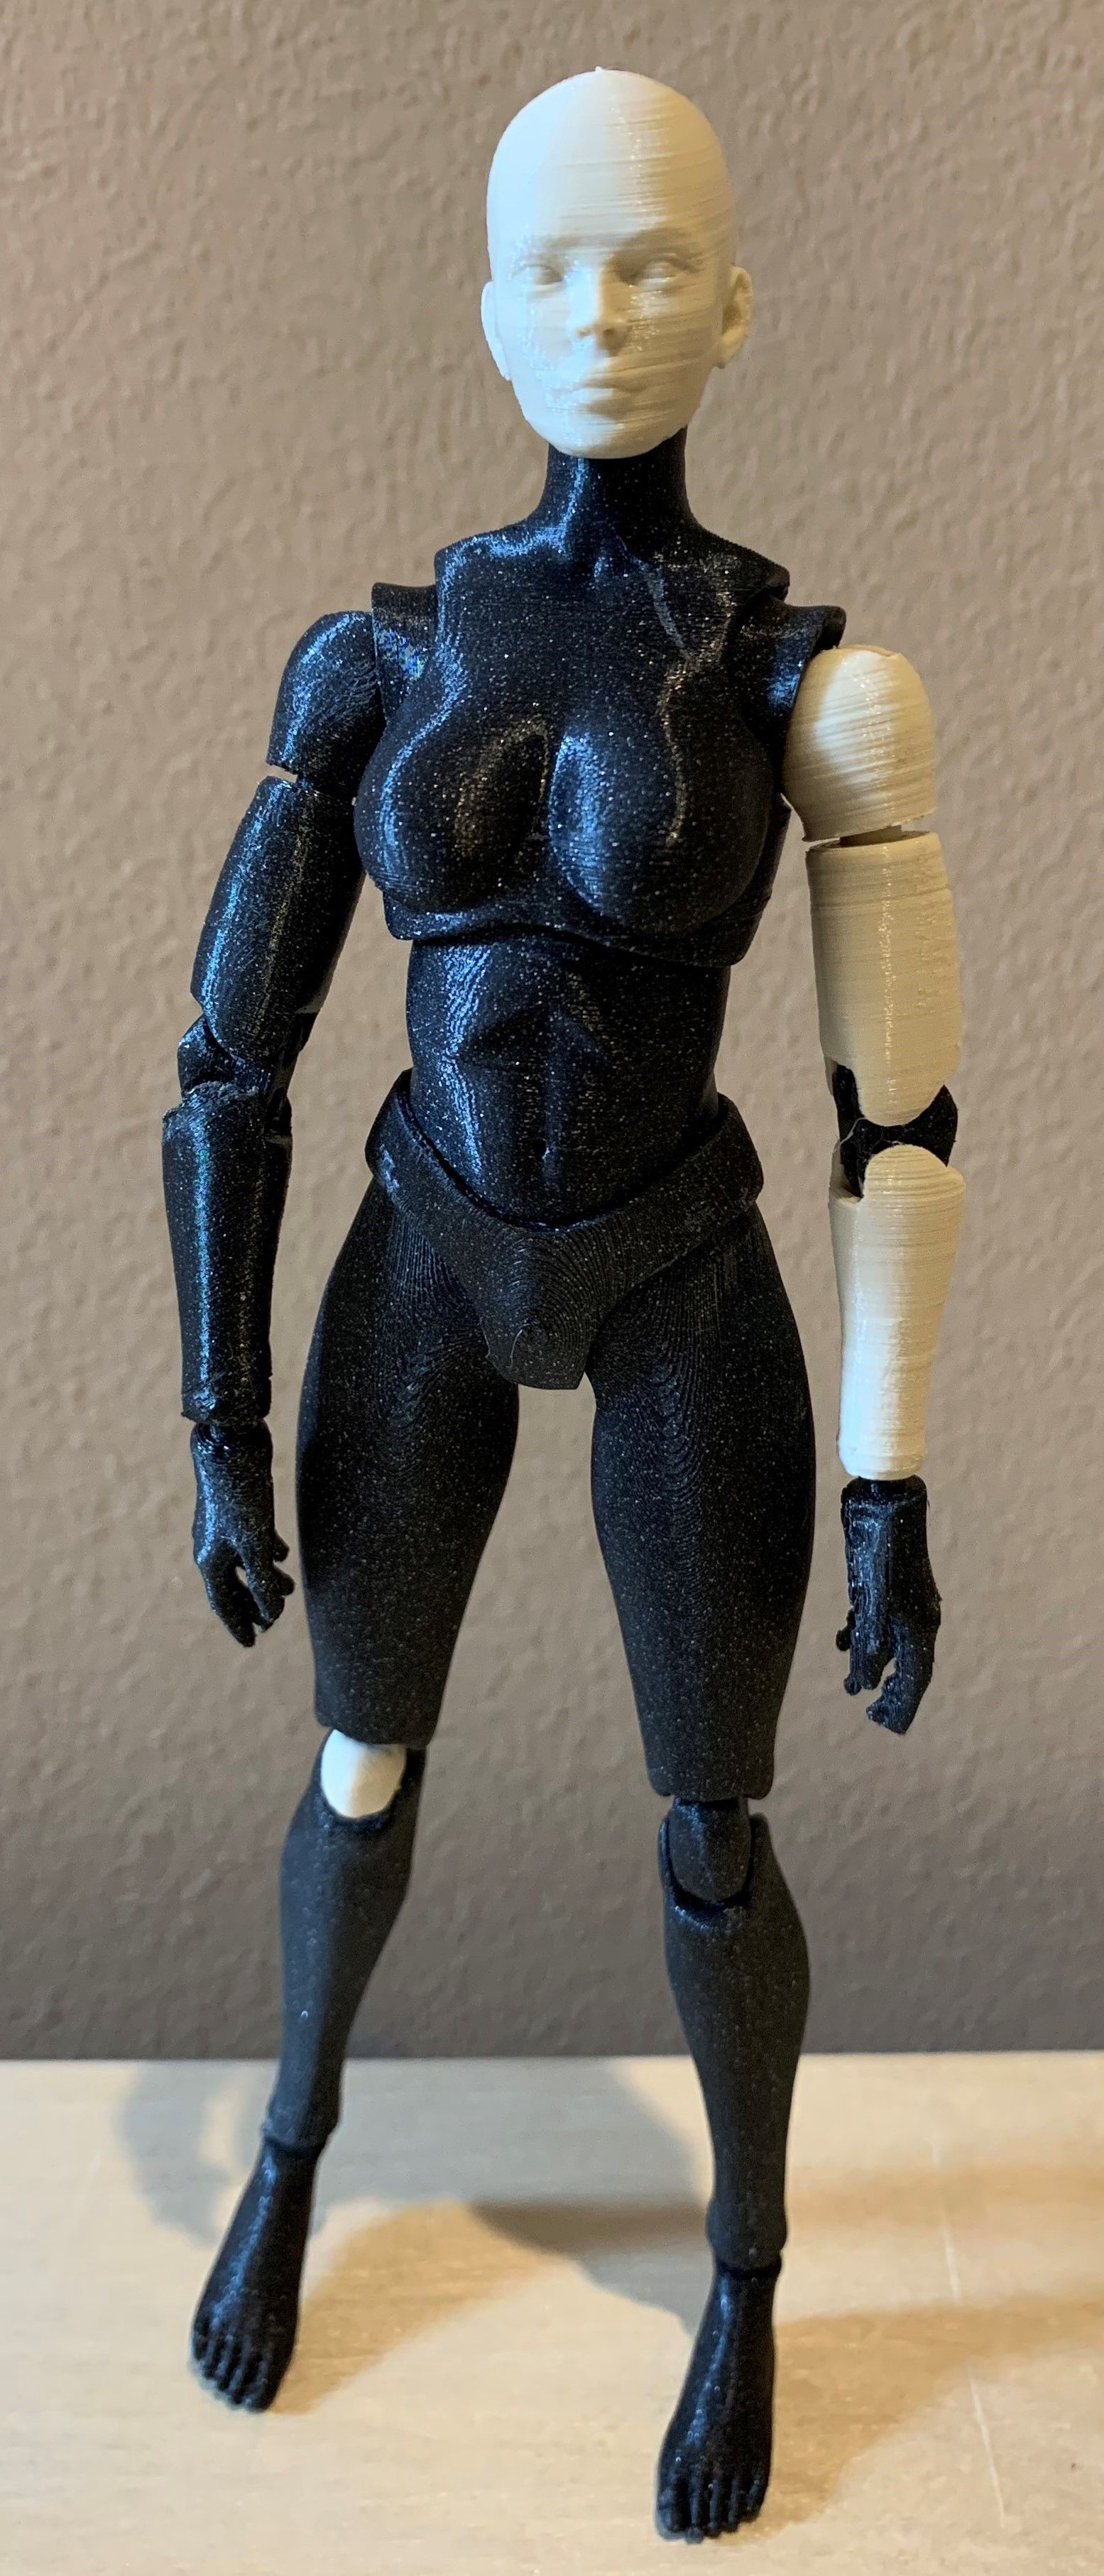 3d Printed Articulated Poseable Female Figure • Made With Prusa I3 Mk3s